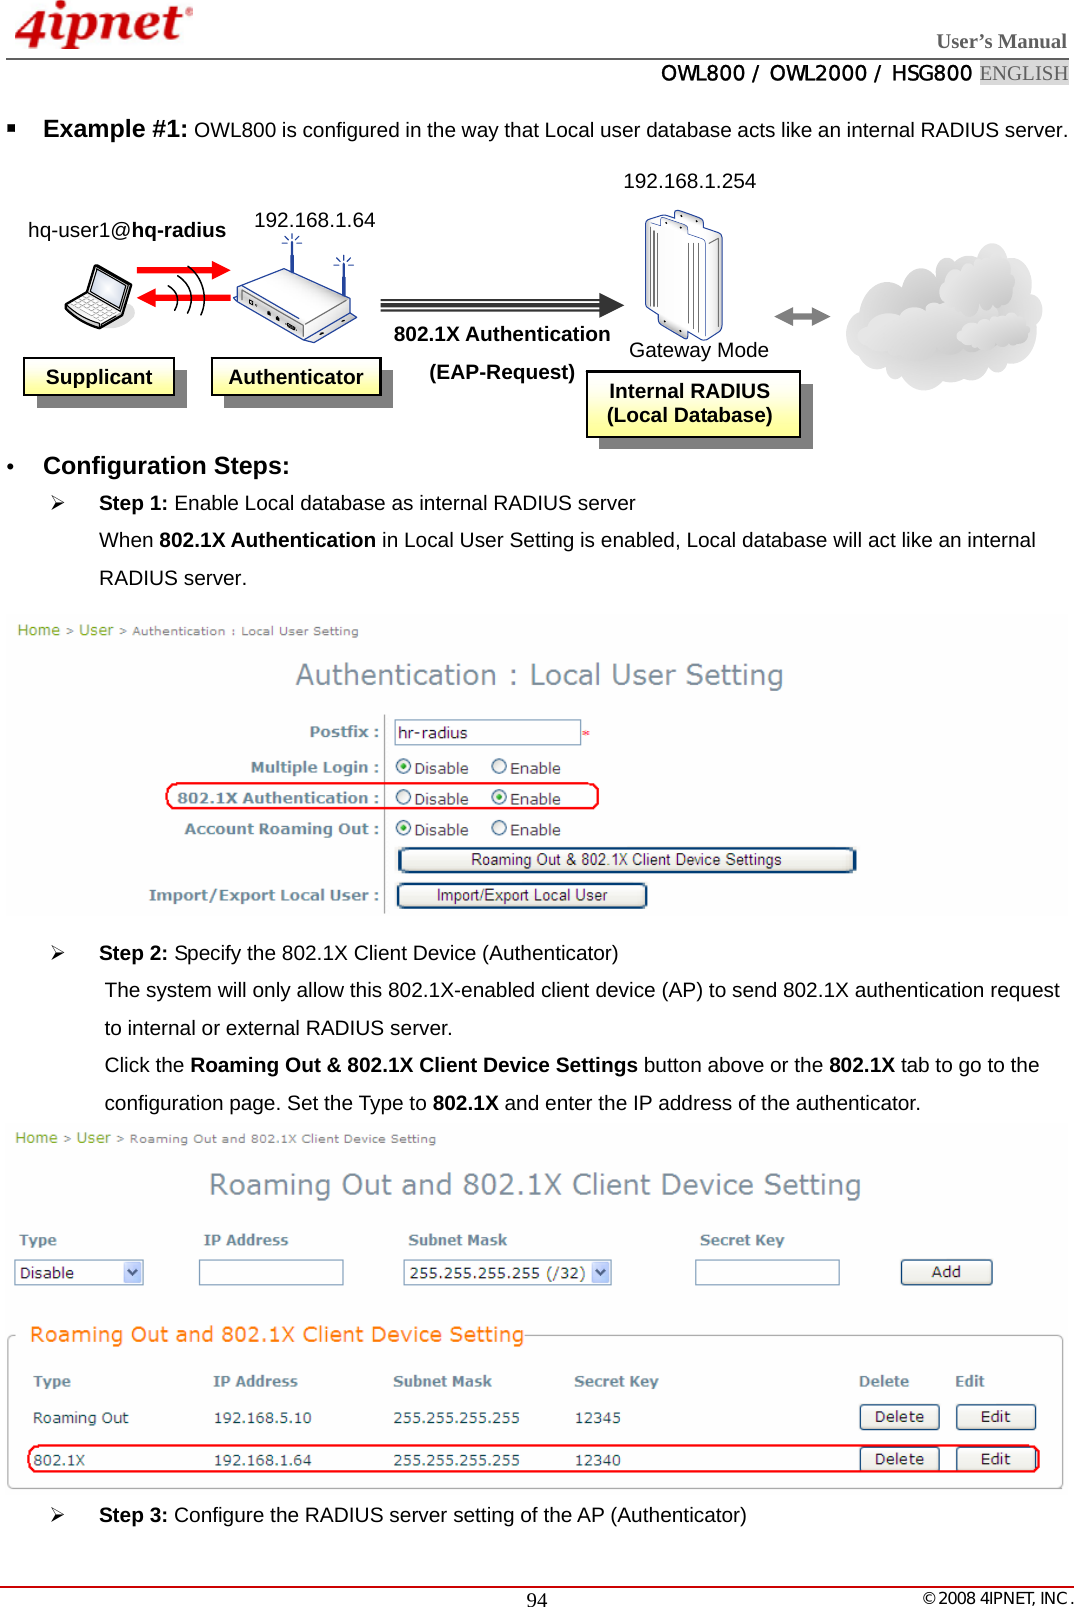  User’s Manual  OWL800 / OWL2000 / HSG800 ENGLISH   © 2008 4IPNET, INC.  94 Example #1: OWL800 is configured in the way that Local user database acts like an internal RADIUS server.         y Configuration Steps: ¾ Step 1: Enable Local database as internal RADIUS server When 802.1X Authentication in Local User Setting is enabled, Local database will act like an internal RADIUS server.  ¾ Step 2: Specify the 802.1X Client Device (Authenticator) The system will only allow this 802.1X-enabled client device (AP) to send 802.1X authentication request to internal or external RADIUS server. Click the Roaming Out &amp; 802.1X Client Device Settings button above or the 802.1X tab to go to the configuration page. Set the Type to 802.1X and enter the IP address of the authenticator.  ¾ Step 3: Configure the RADIUS server setting of the AP (Authenticator) Internal RADIUS(Local Database)802.1X Authentication (EAP-Request) Supplicant 192.168.1.64 Authenticator hq-user1@hq-radius 192.168.1.254Gateway Mode